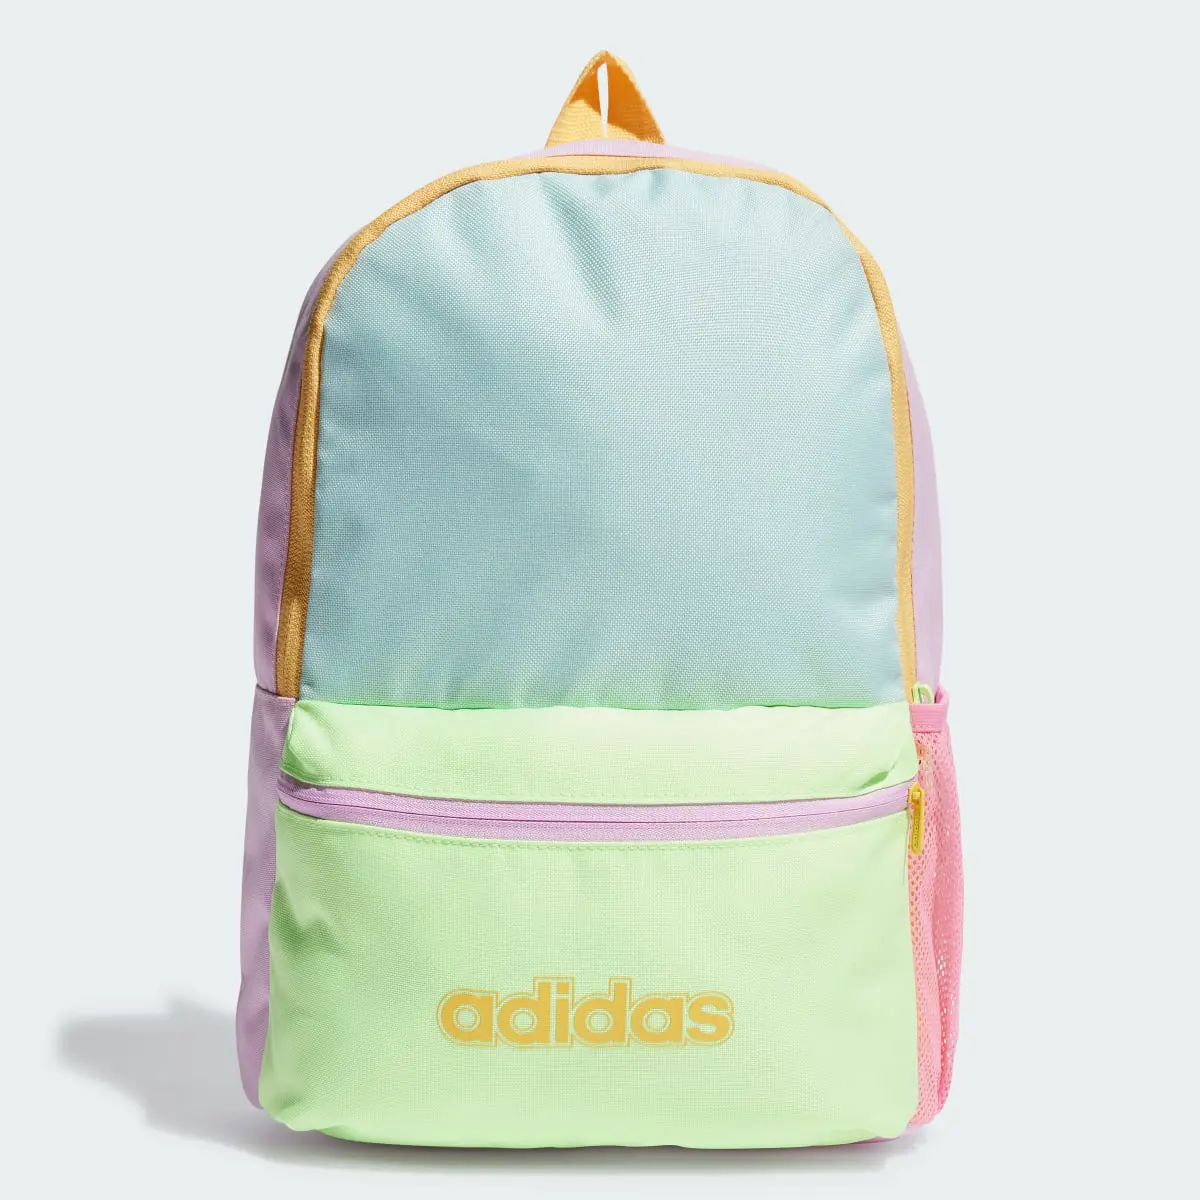 Adidas Graphic Backpack. 1